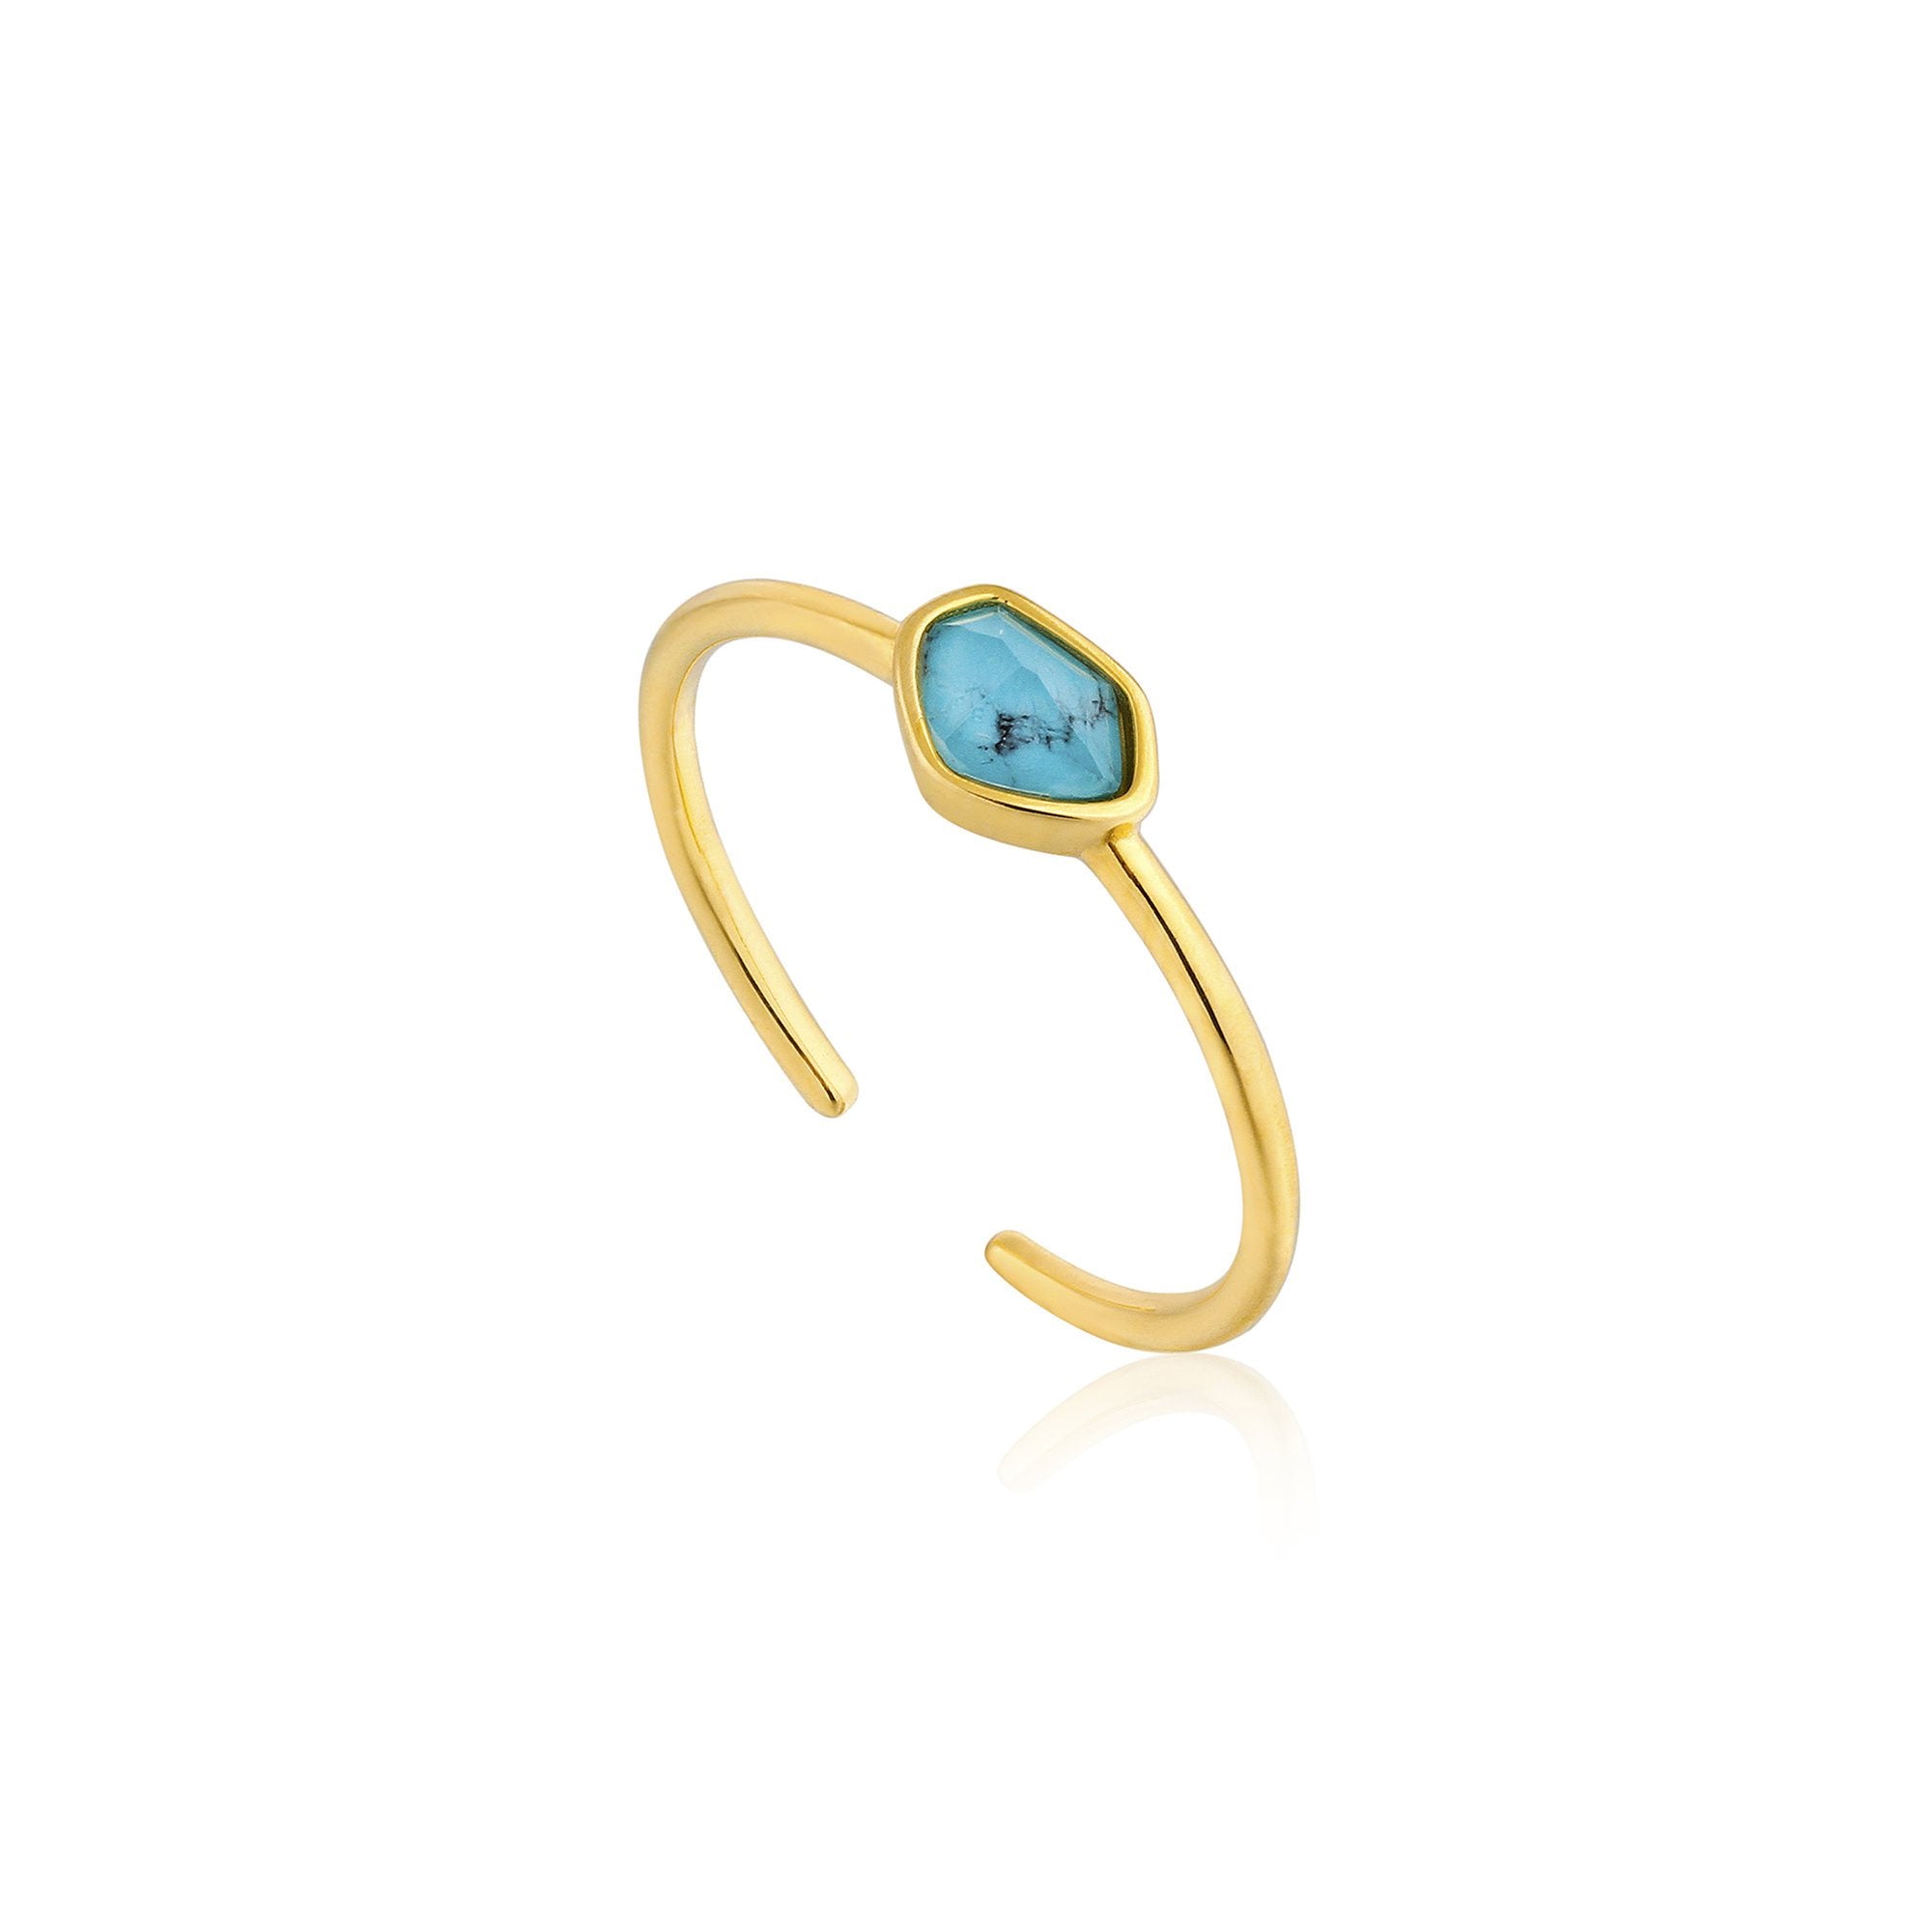 Ring by Ania Haie